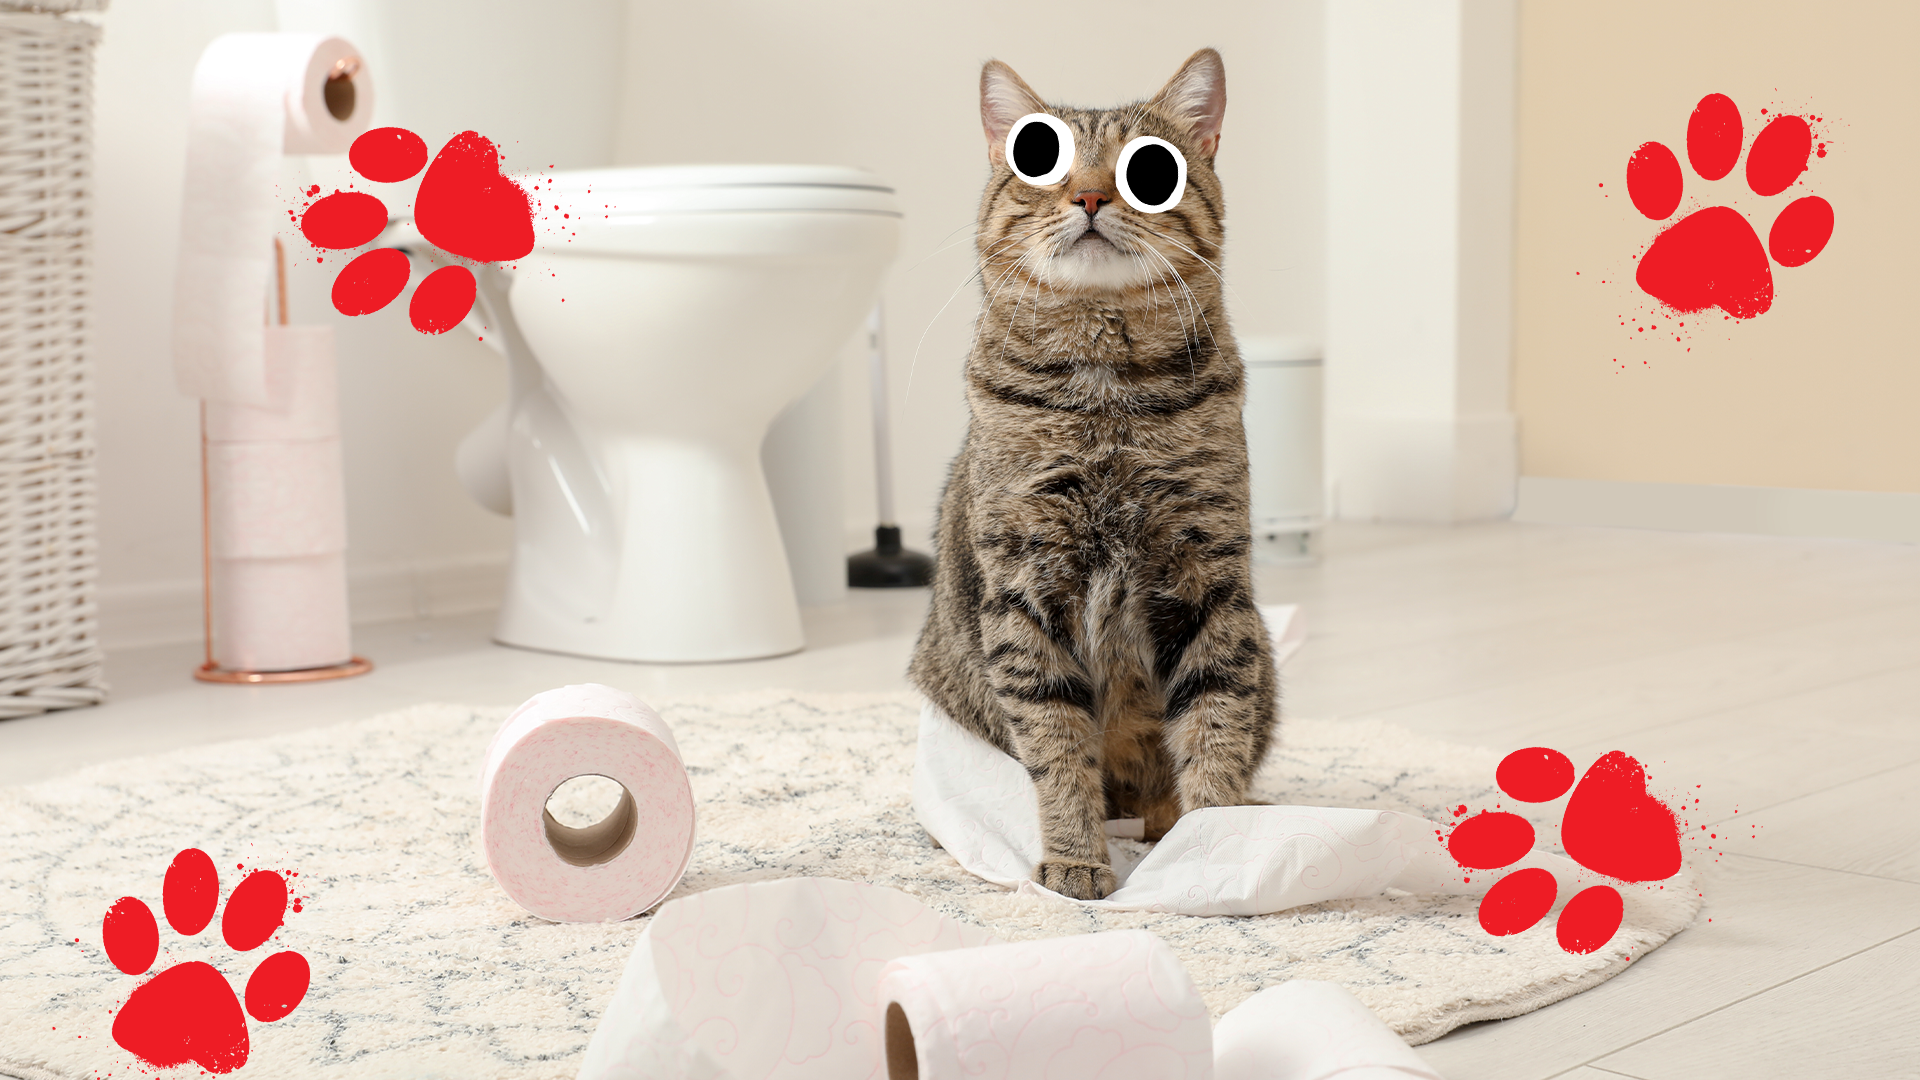 A cat surrounded by toilet paper in a nice bathroom